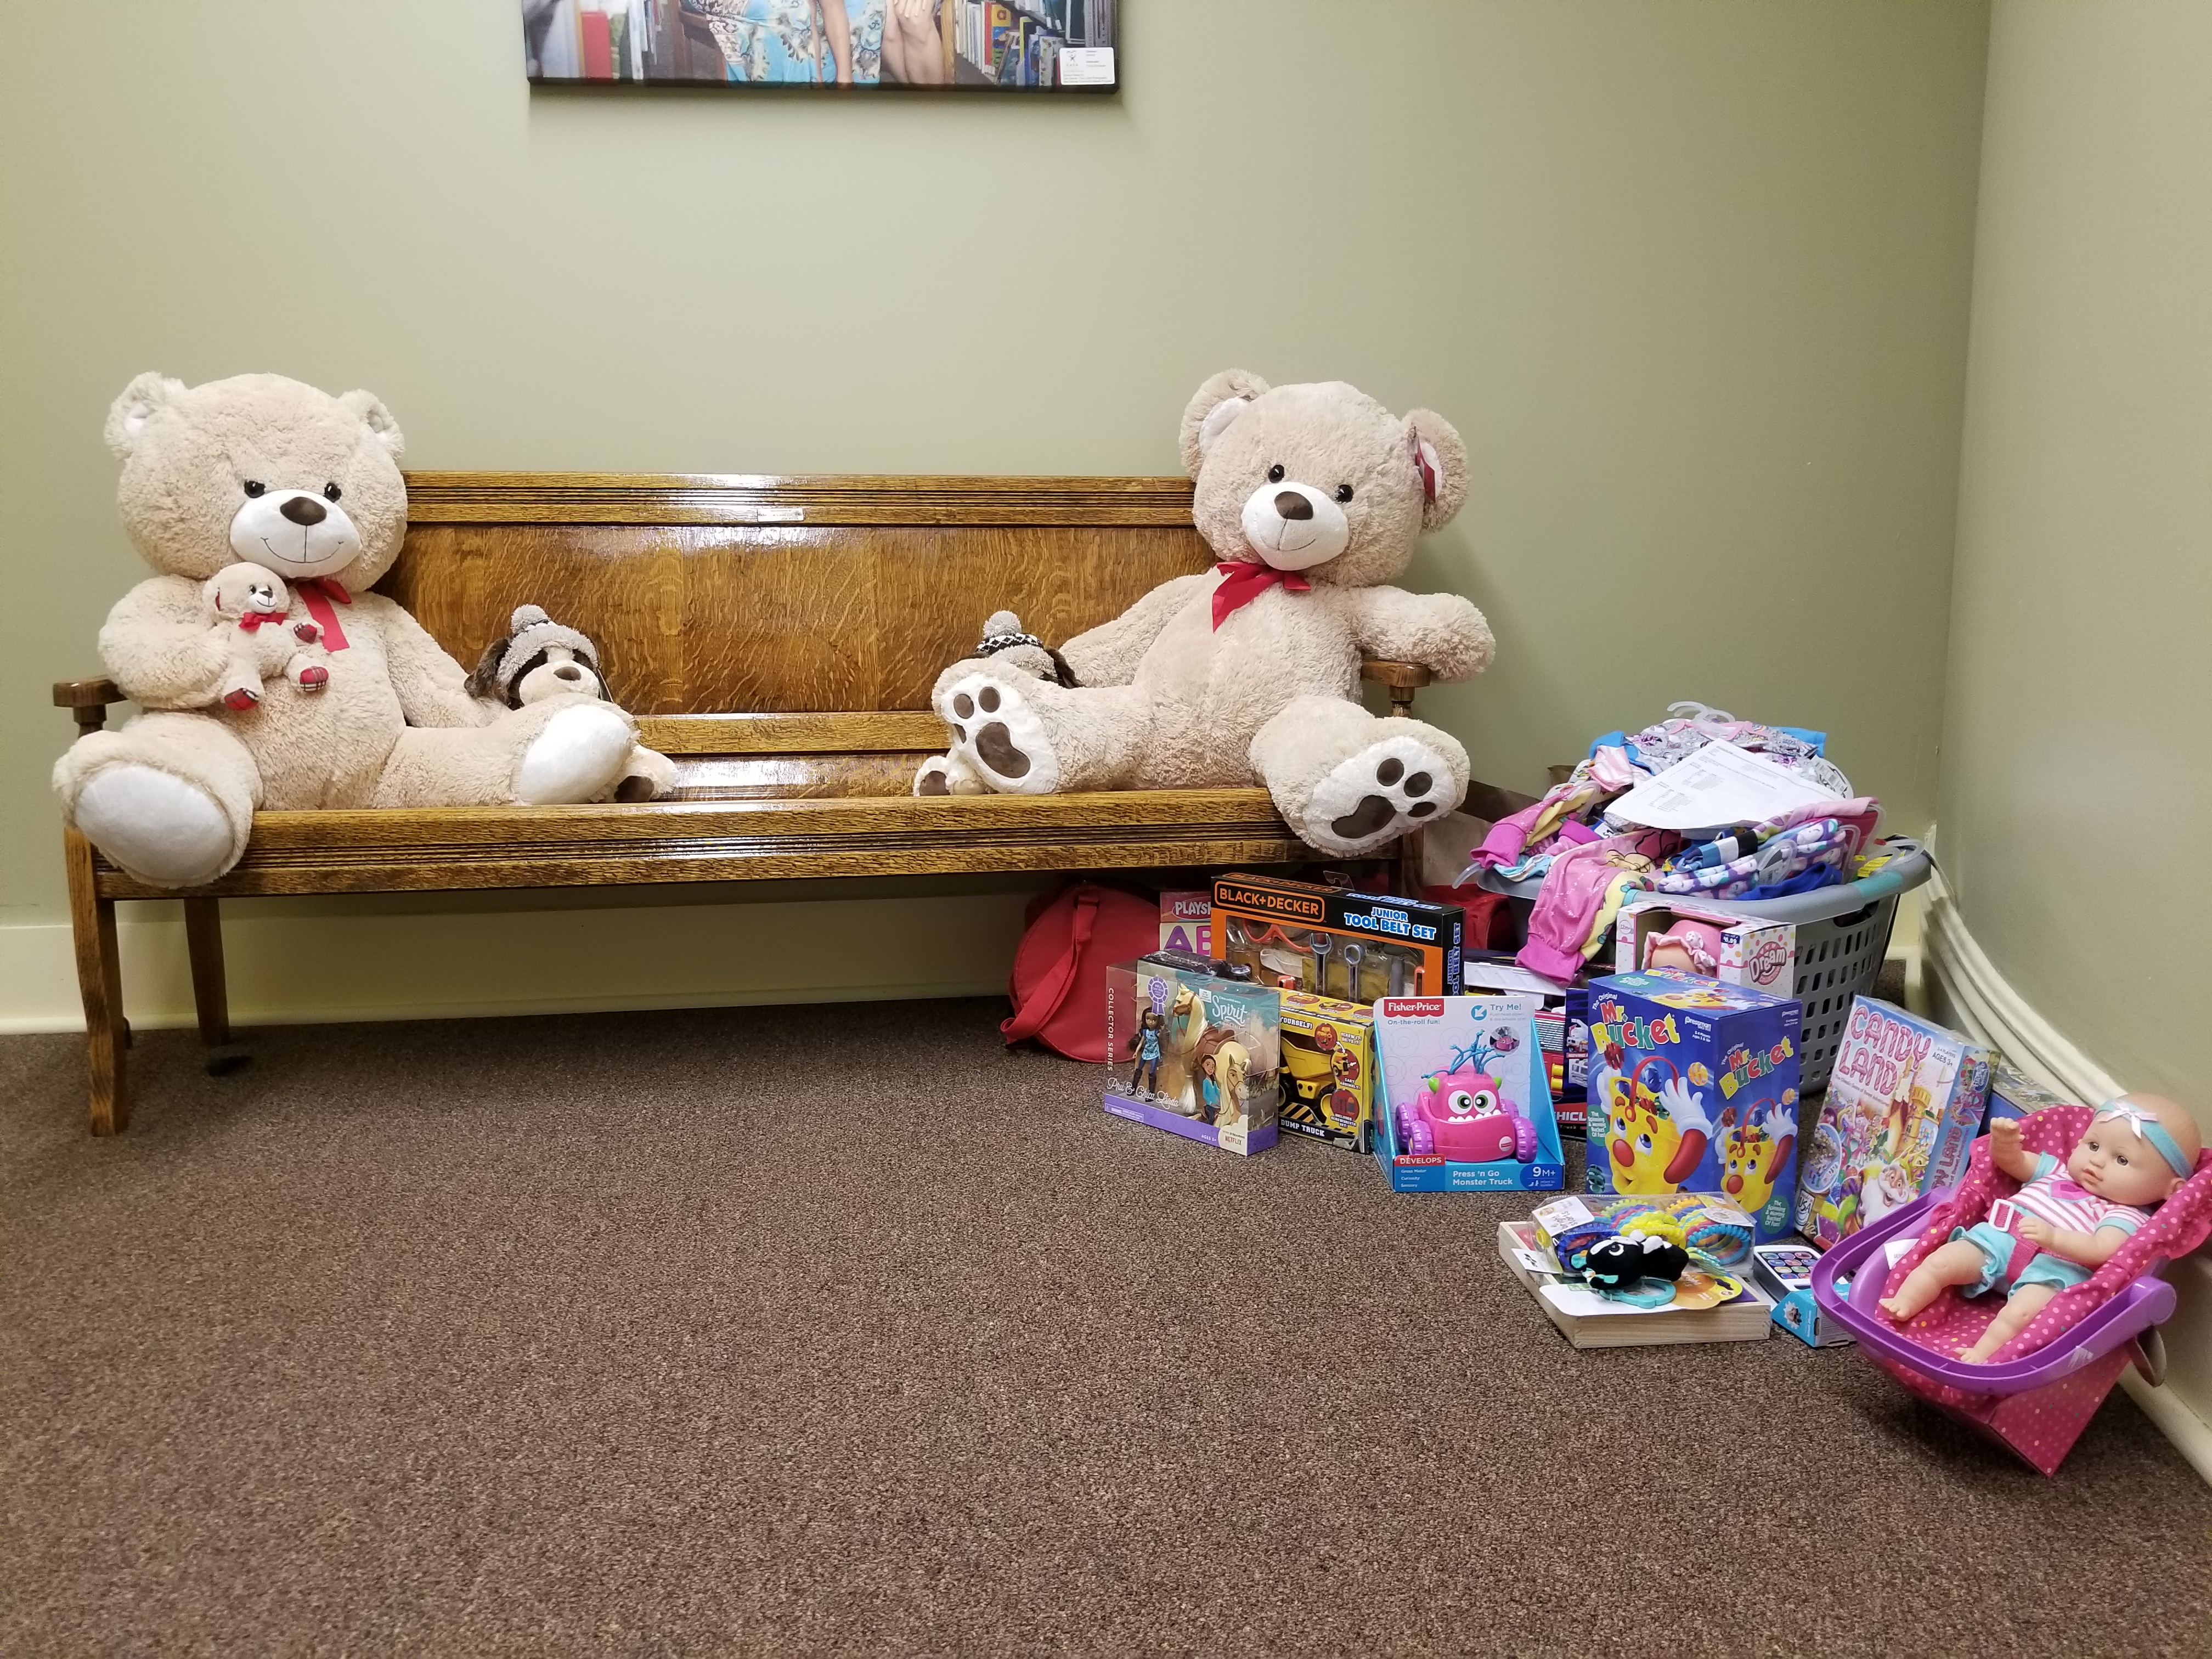 Two teddy bears sit opposite one another on a bench, to the right of the bench on the floor there is a pile of miscellaneous toys, and above the two bears a portrait can be barely be seen in the frame.